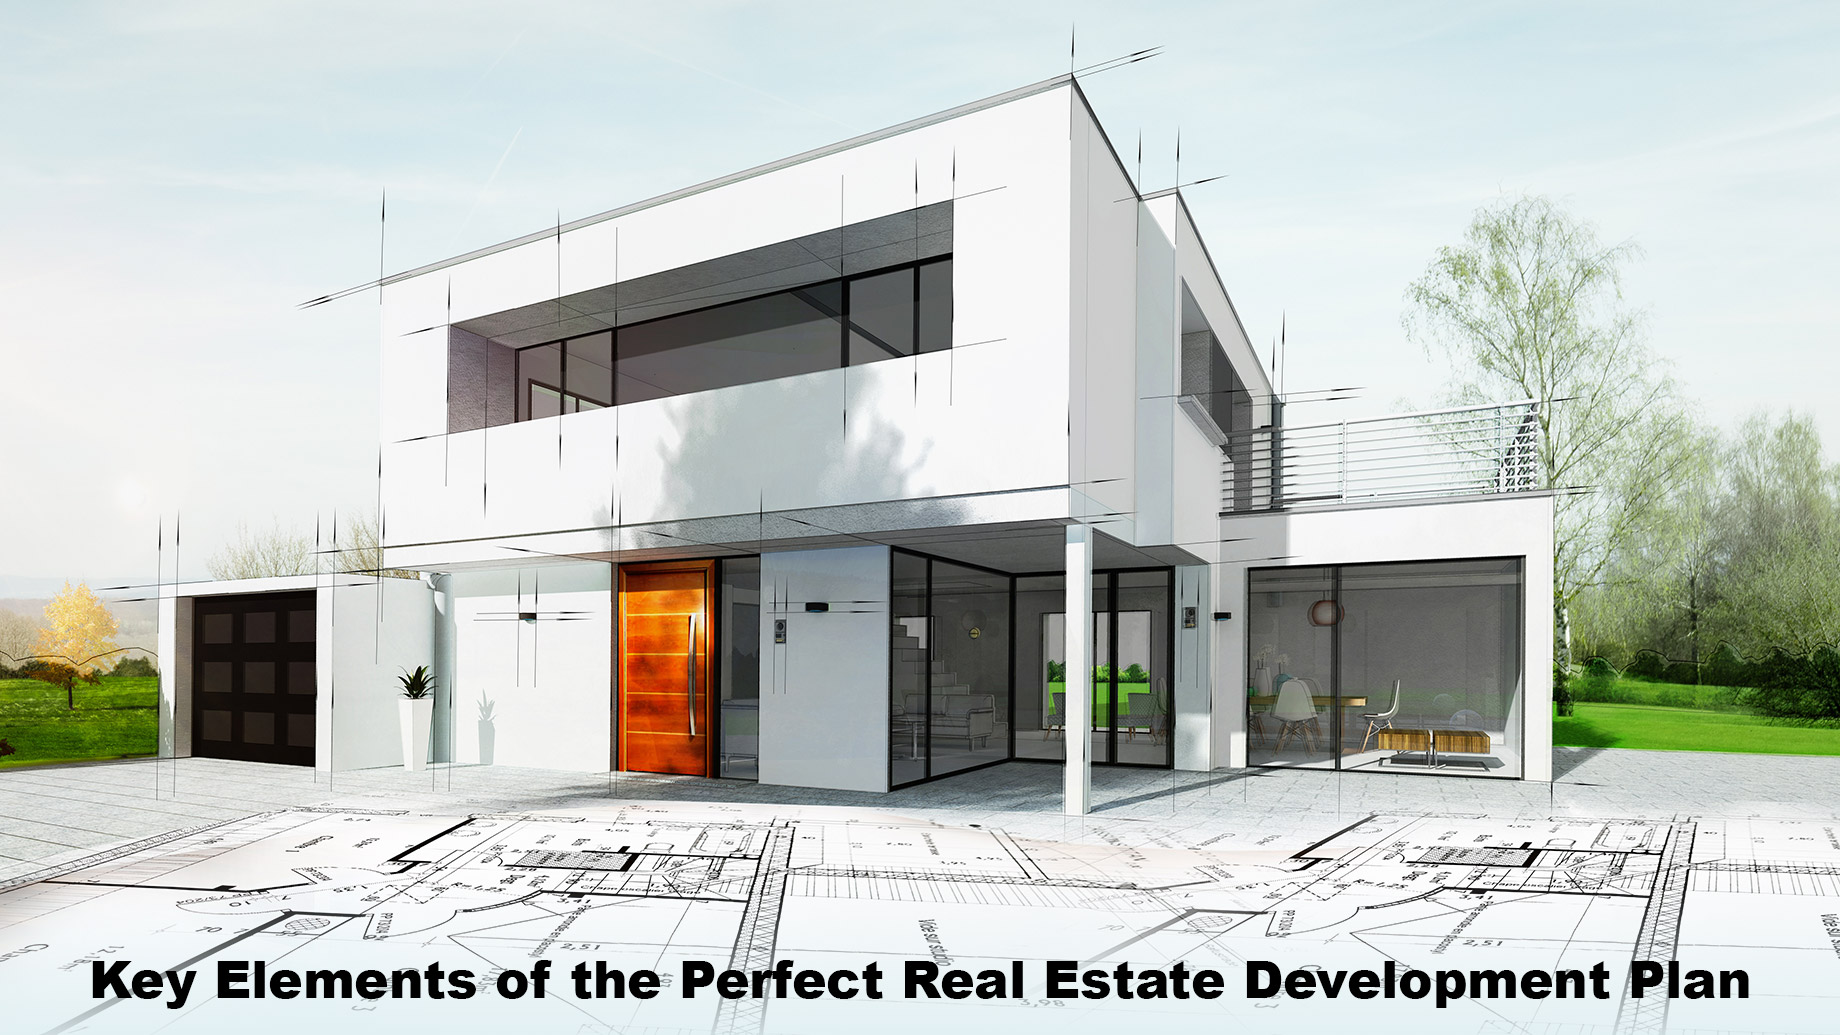 Key Elements of the Perfect Real Estate Development Plan